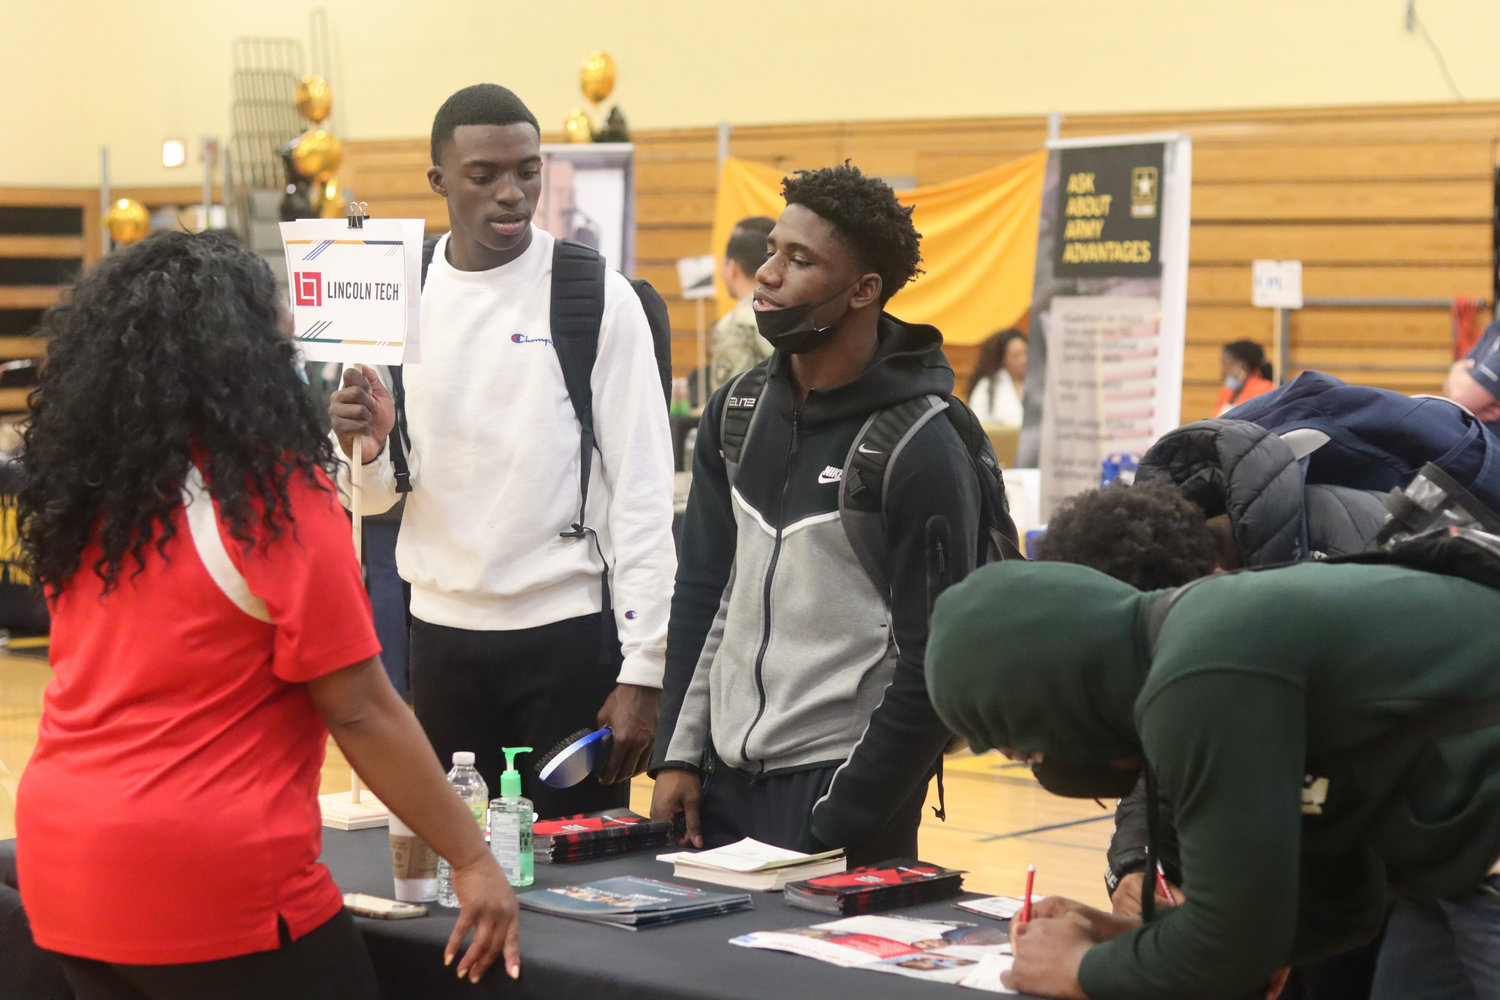 Recruiters from schools like Lincoln Tech, which has campuses across the United States, presented information to Uniondale High School students.